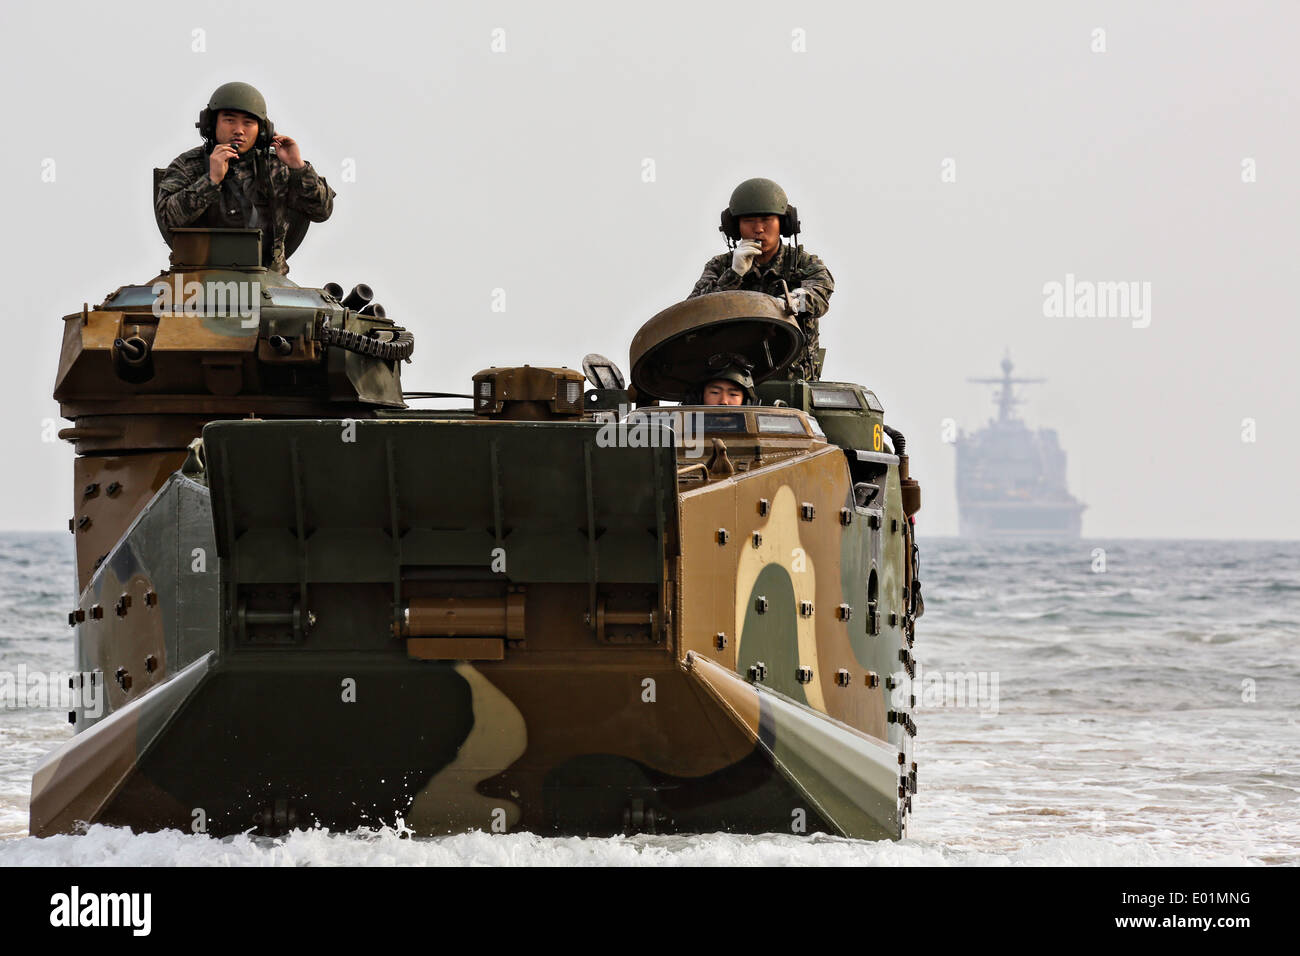 Republic of Korea Marines drive an Amphibious Assault Vehicle onto Dogue Beach during exercise Ssang Yong April 3, 2014 in Pohang, South Korea. Stock Photo